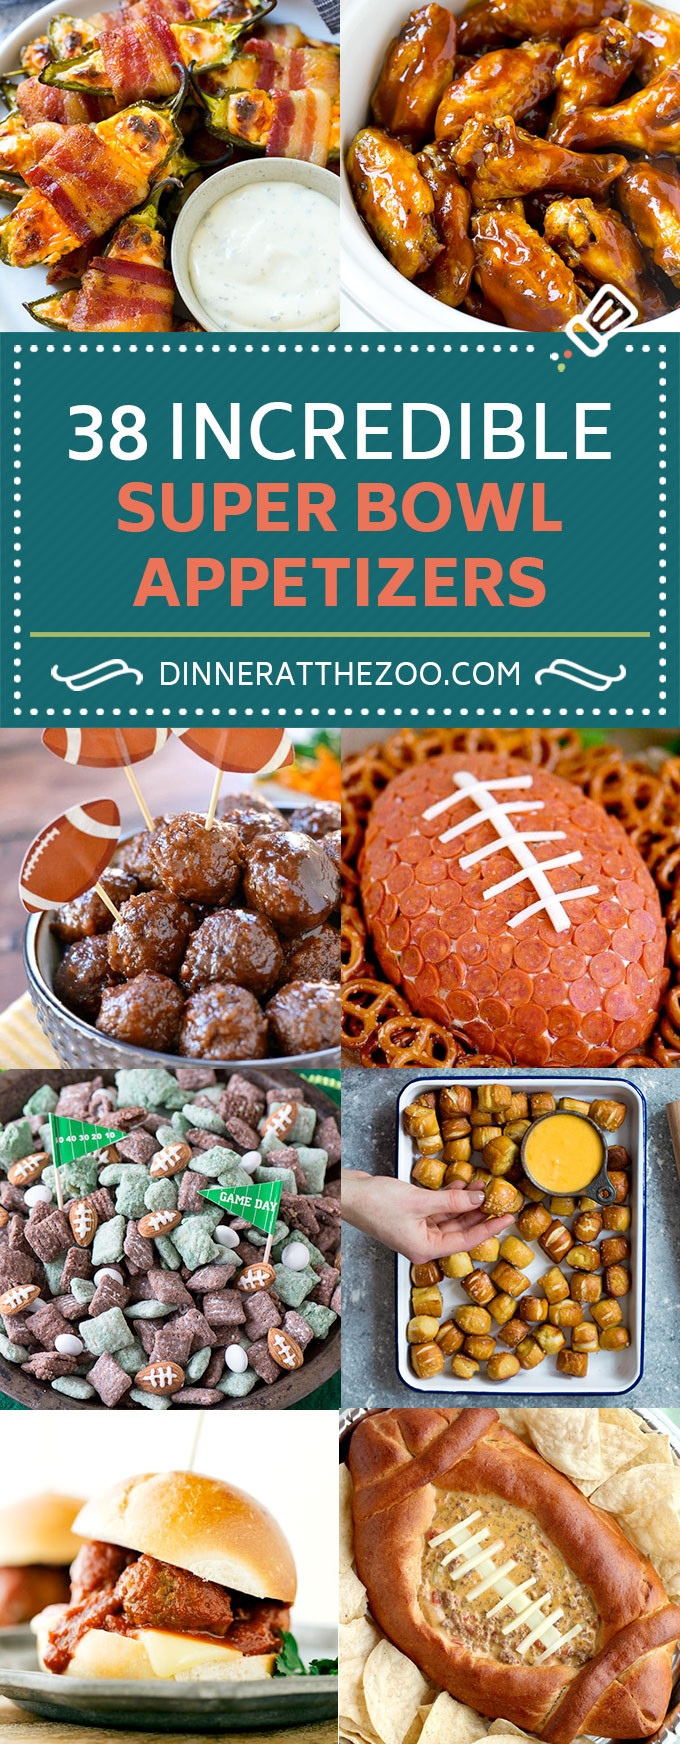 Good Super Bowl Recipes
 45 Incredible Super Bowl Appetizer Recipes Dinner at the Zoo